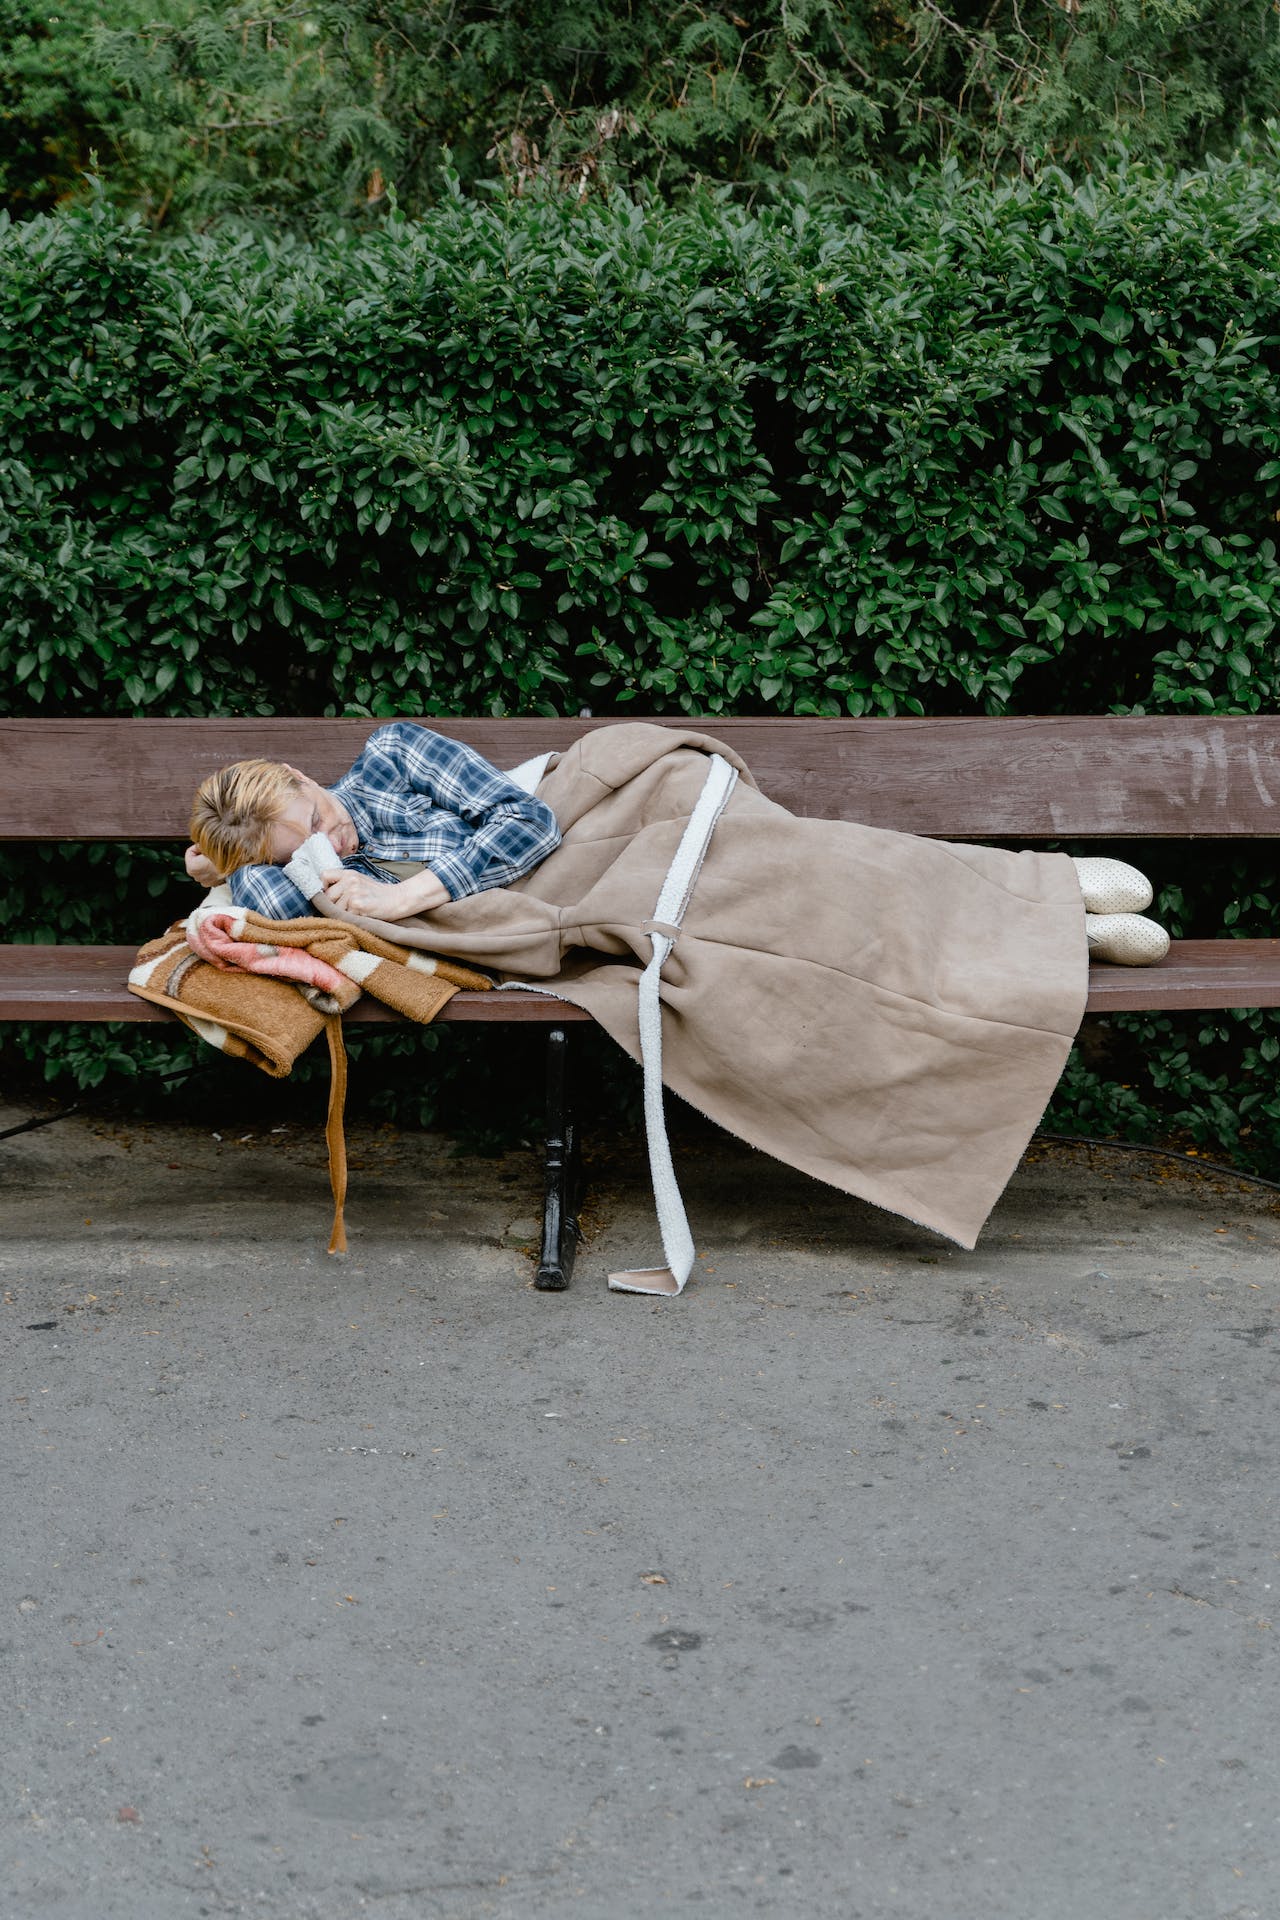 A Woman Sleeping on the Bench